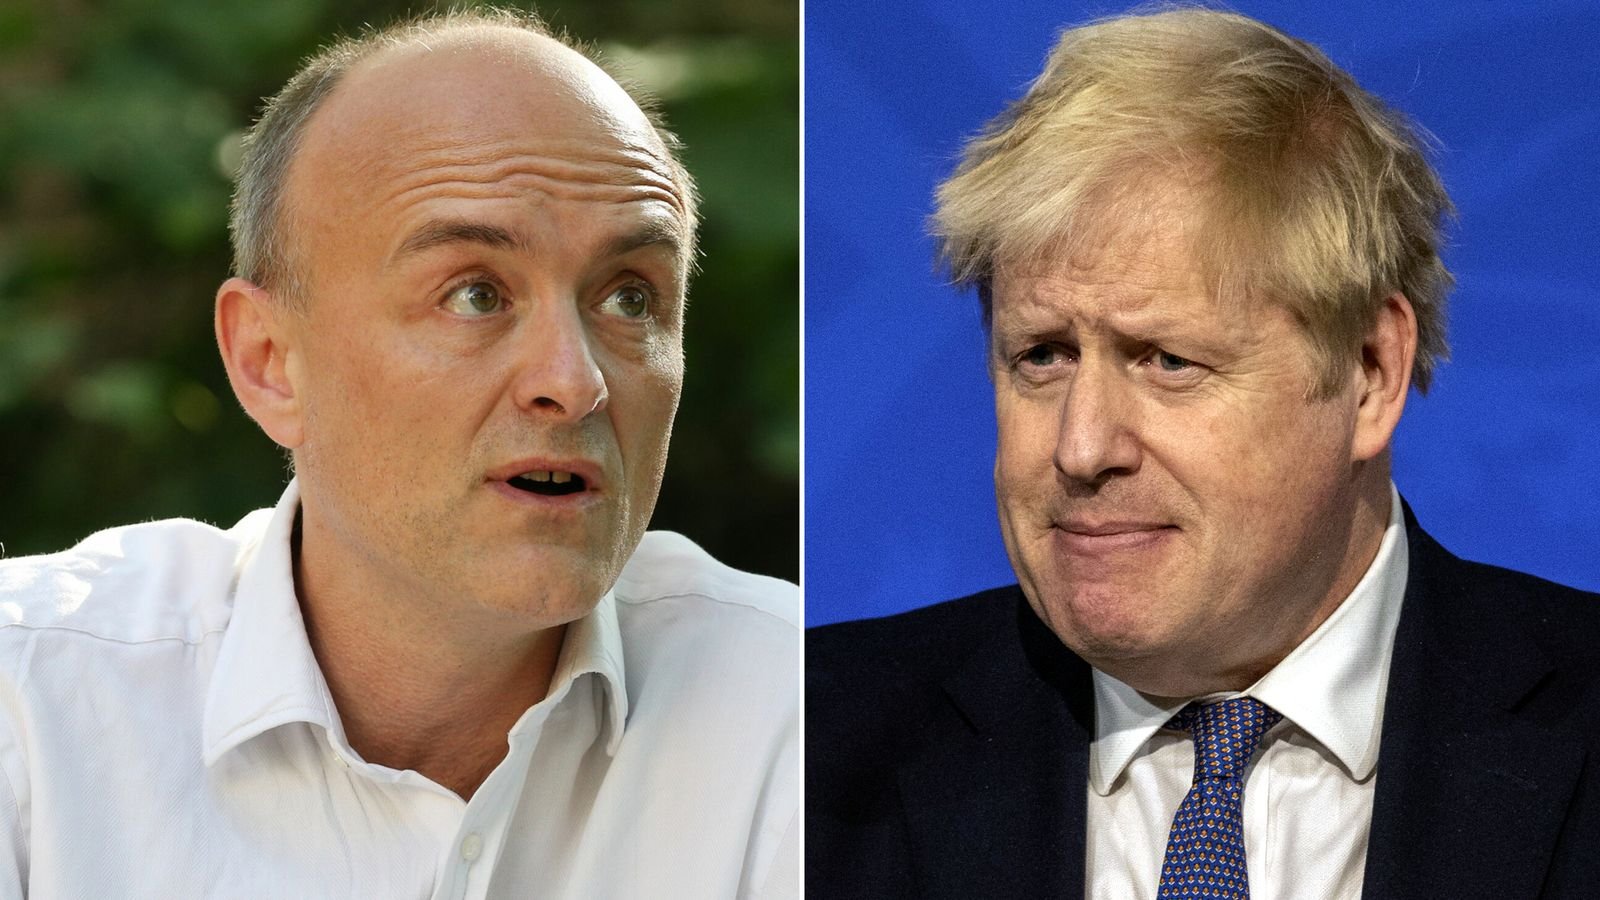 Boris Johnson 'lied to parliament' about Downing Street party, Dominic Cummings says